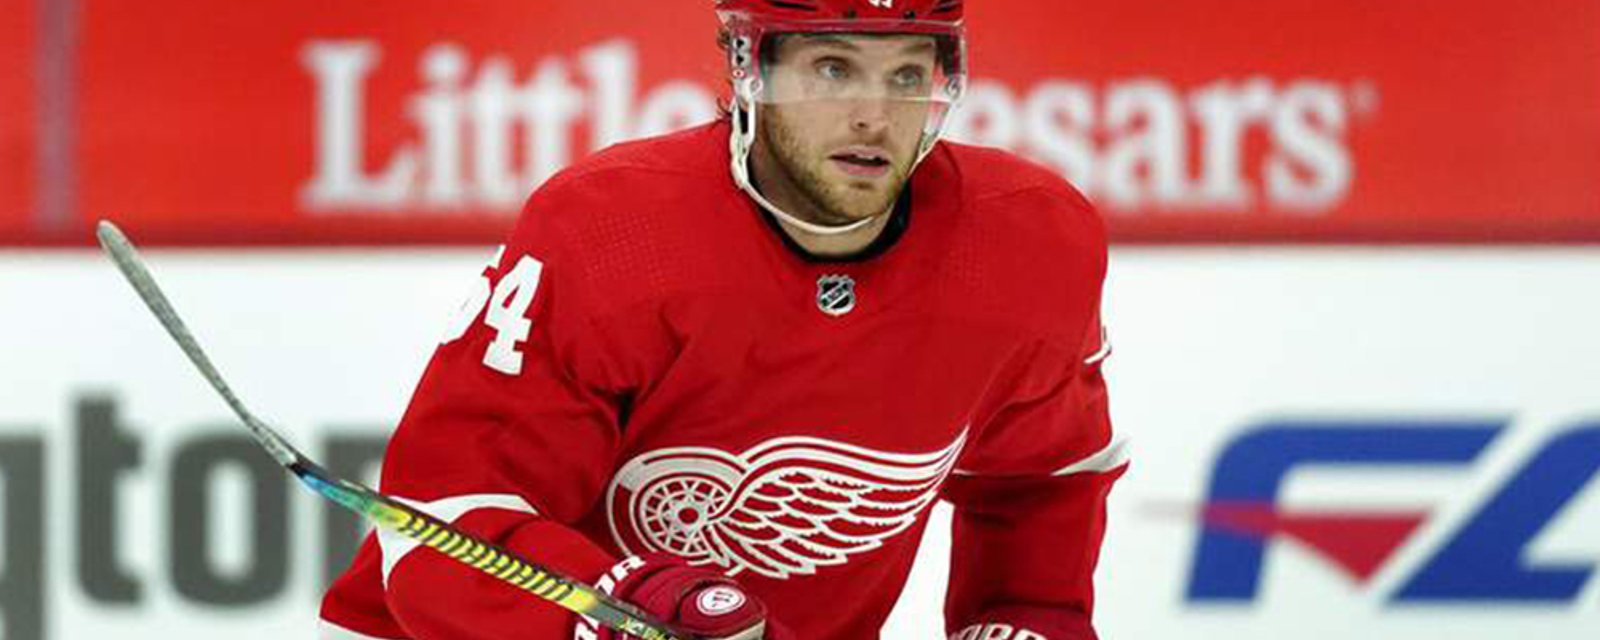 Detroit Red Wings officially inform Bobby Ryan of his future in Hockeytown